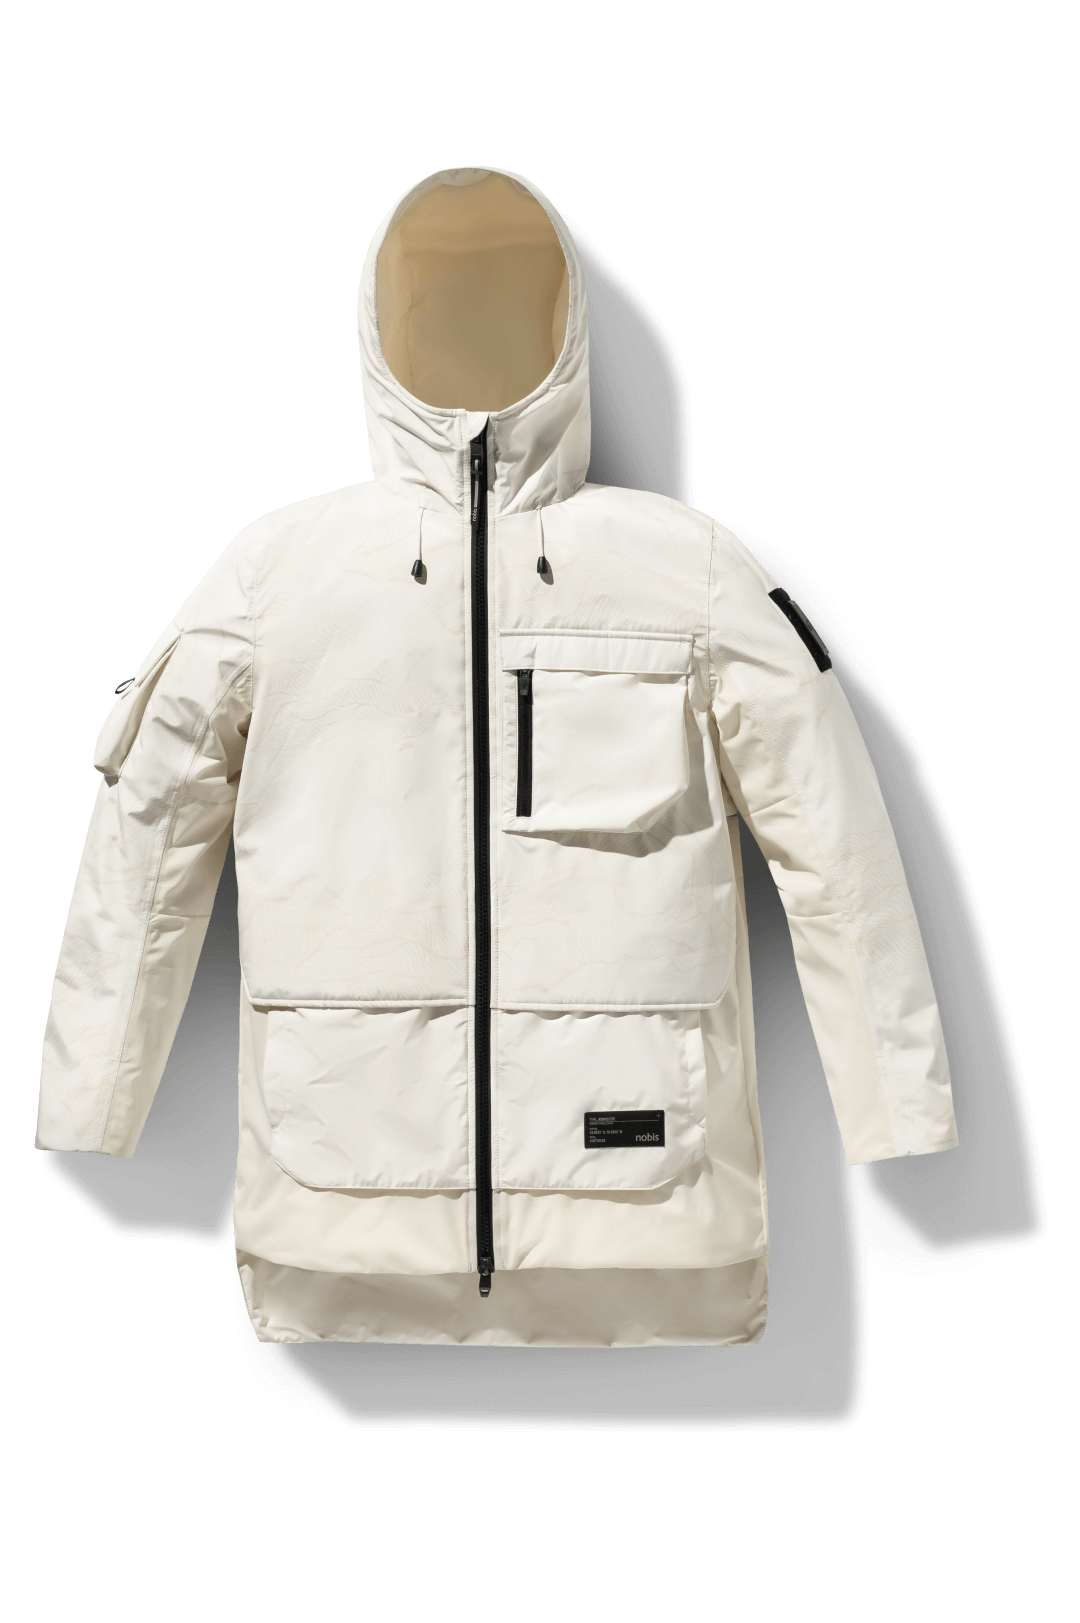 Alta Men's Performance Shell Jacket in hip length, Primaloft Gold Insulation Active+, chest and waist pockets, ventilation under arms, reflective detailing on hood and back, two-way front zipper, and non-removable hood with adjustable drawstrings, in Wheat Desert